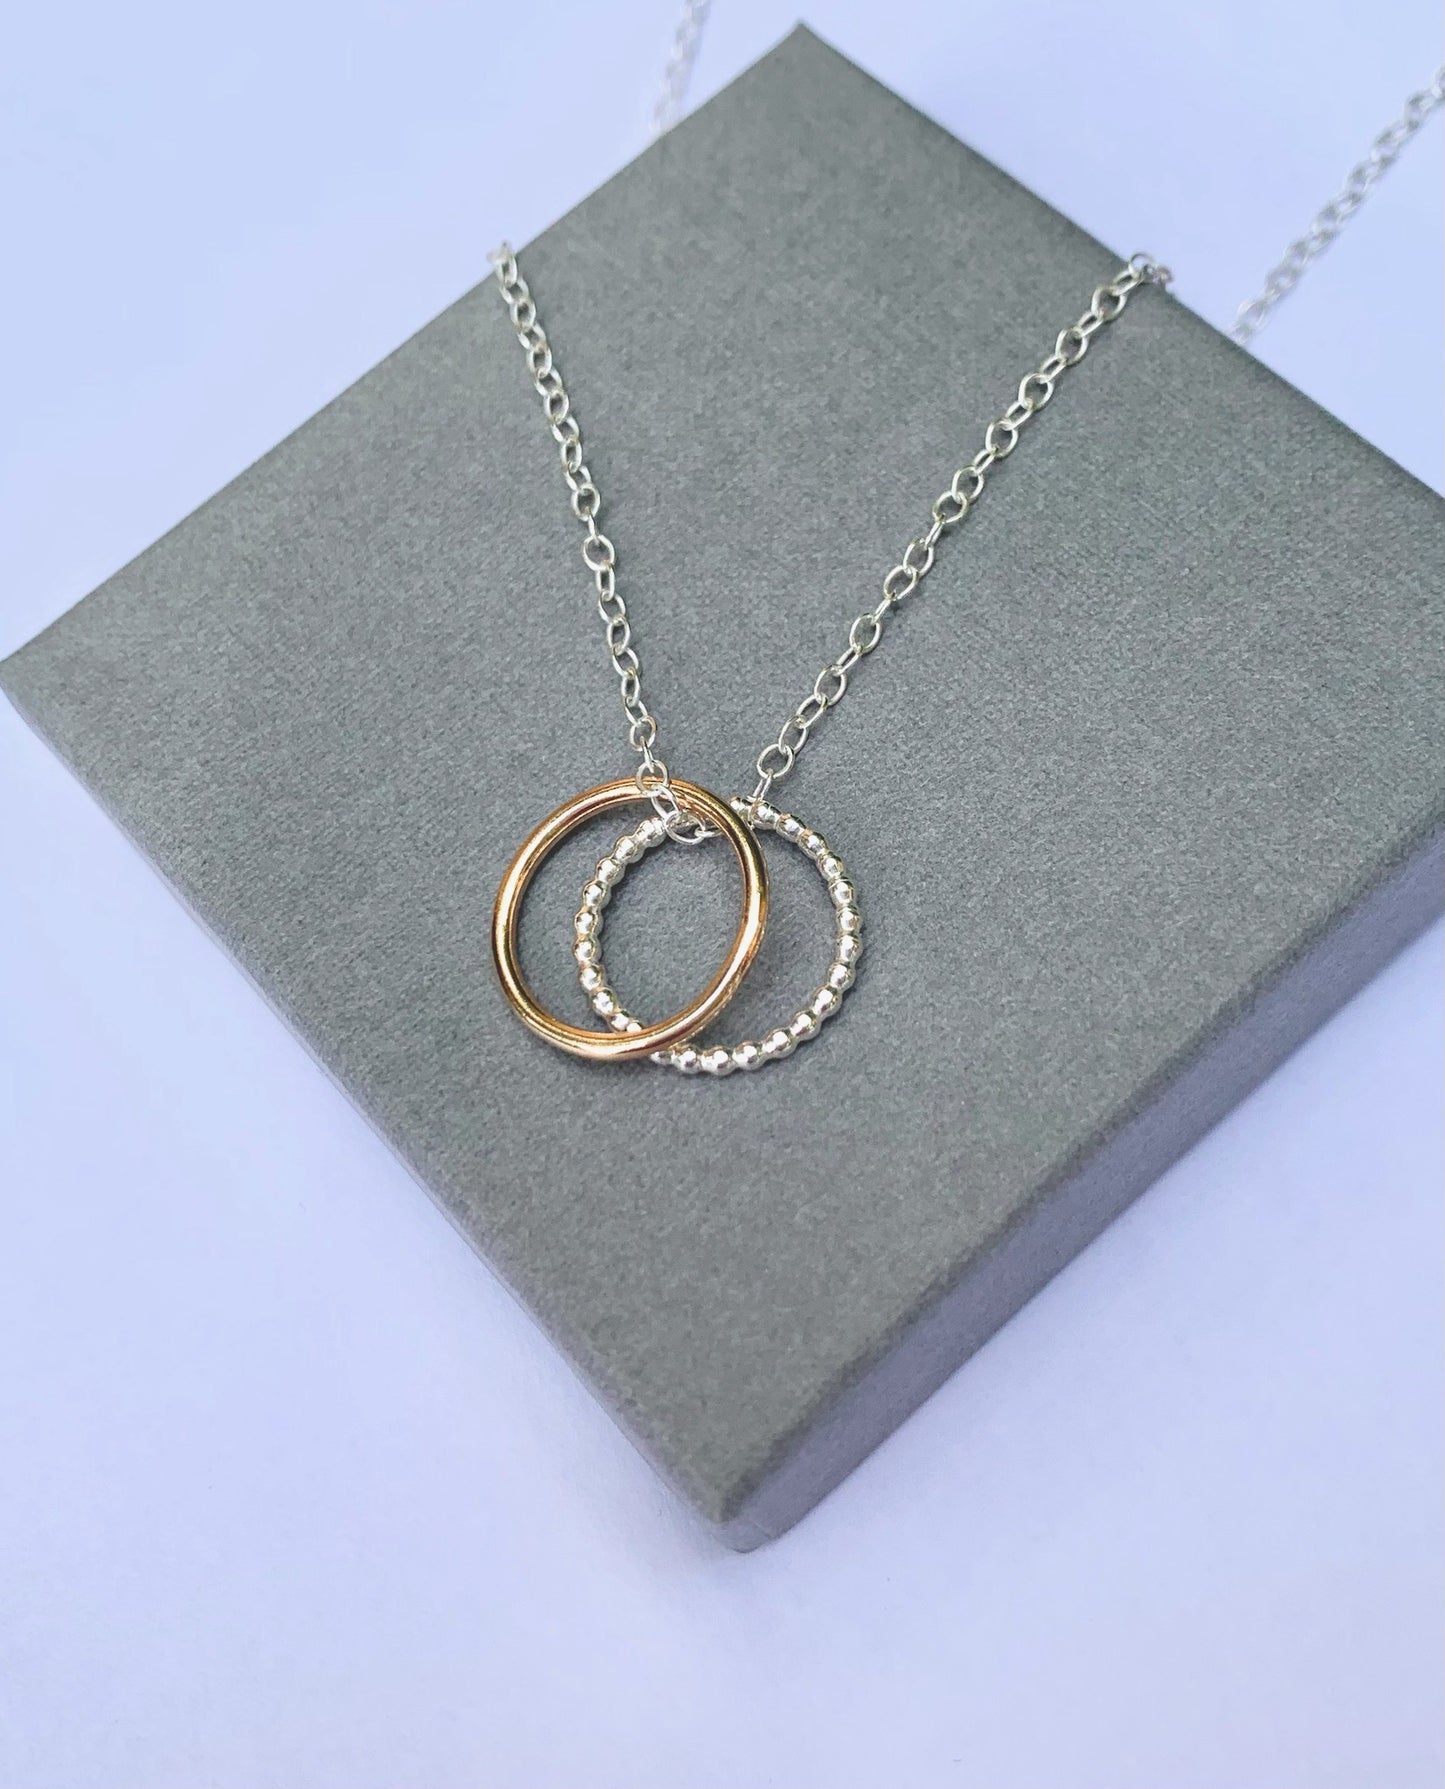 Gold and silver circles necklace